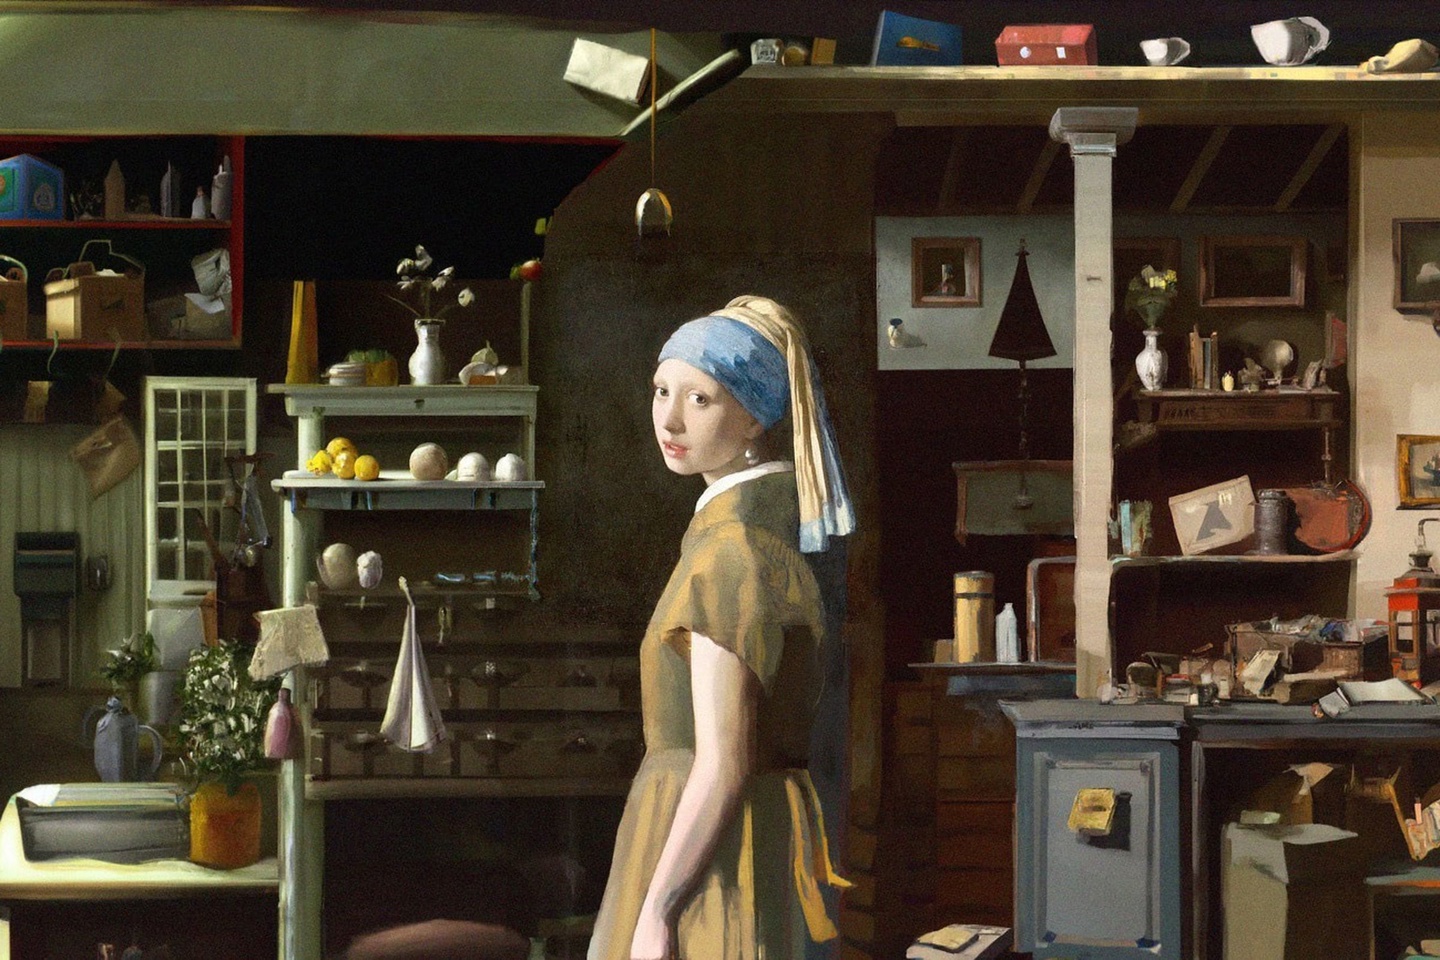 An image showing Johannes Vermeer’s painting “Girl with a Pearl Earring,” which has been extended beyond its regular borders with the help of OpenAI’s DALL-E tool.